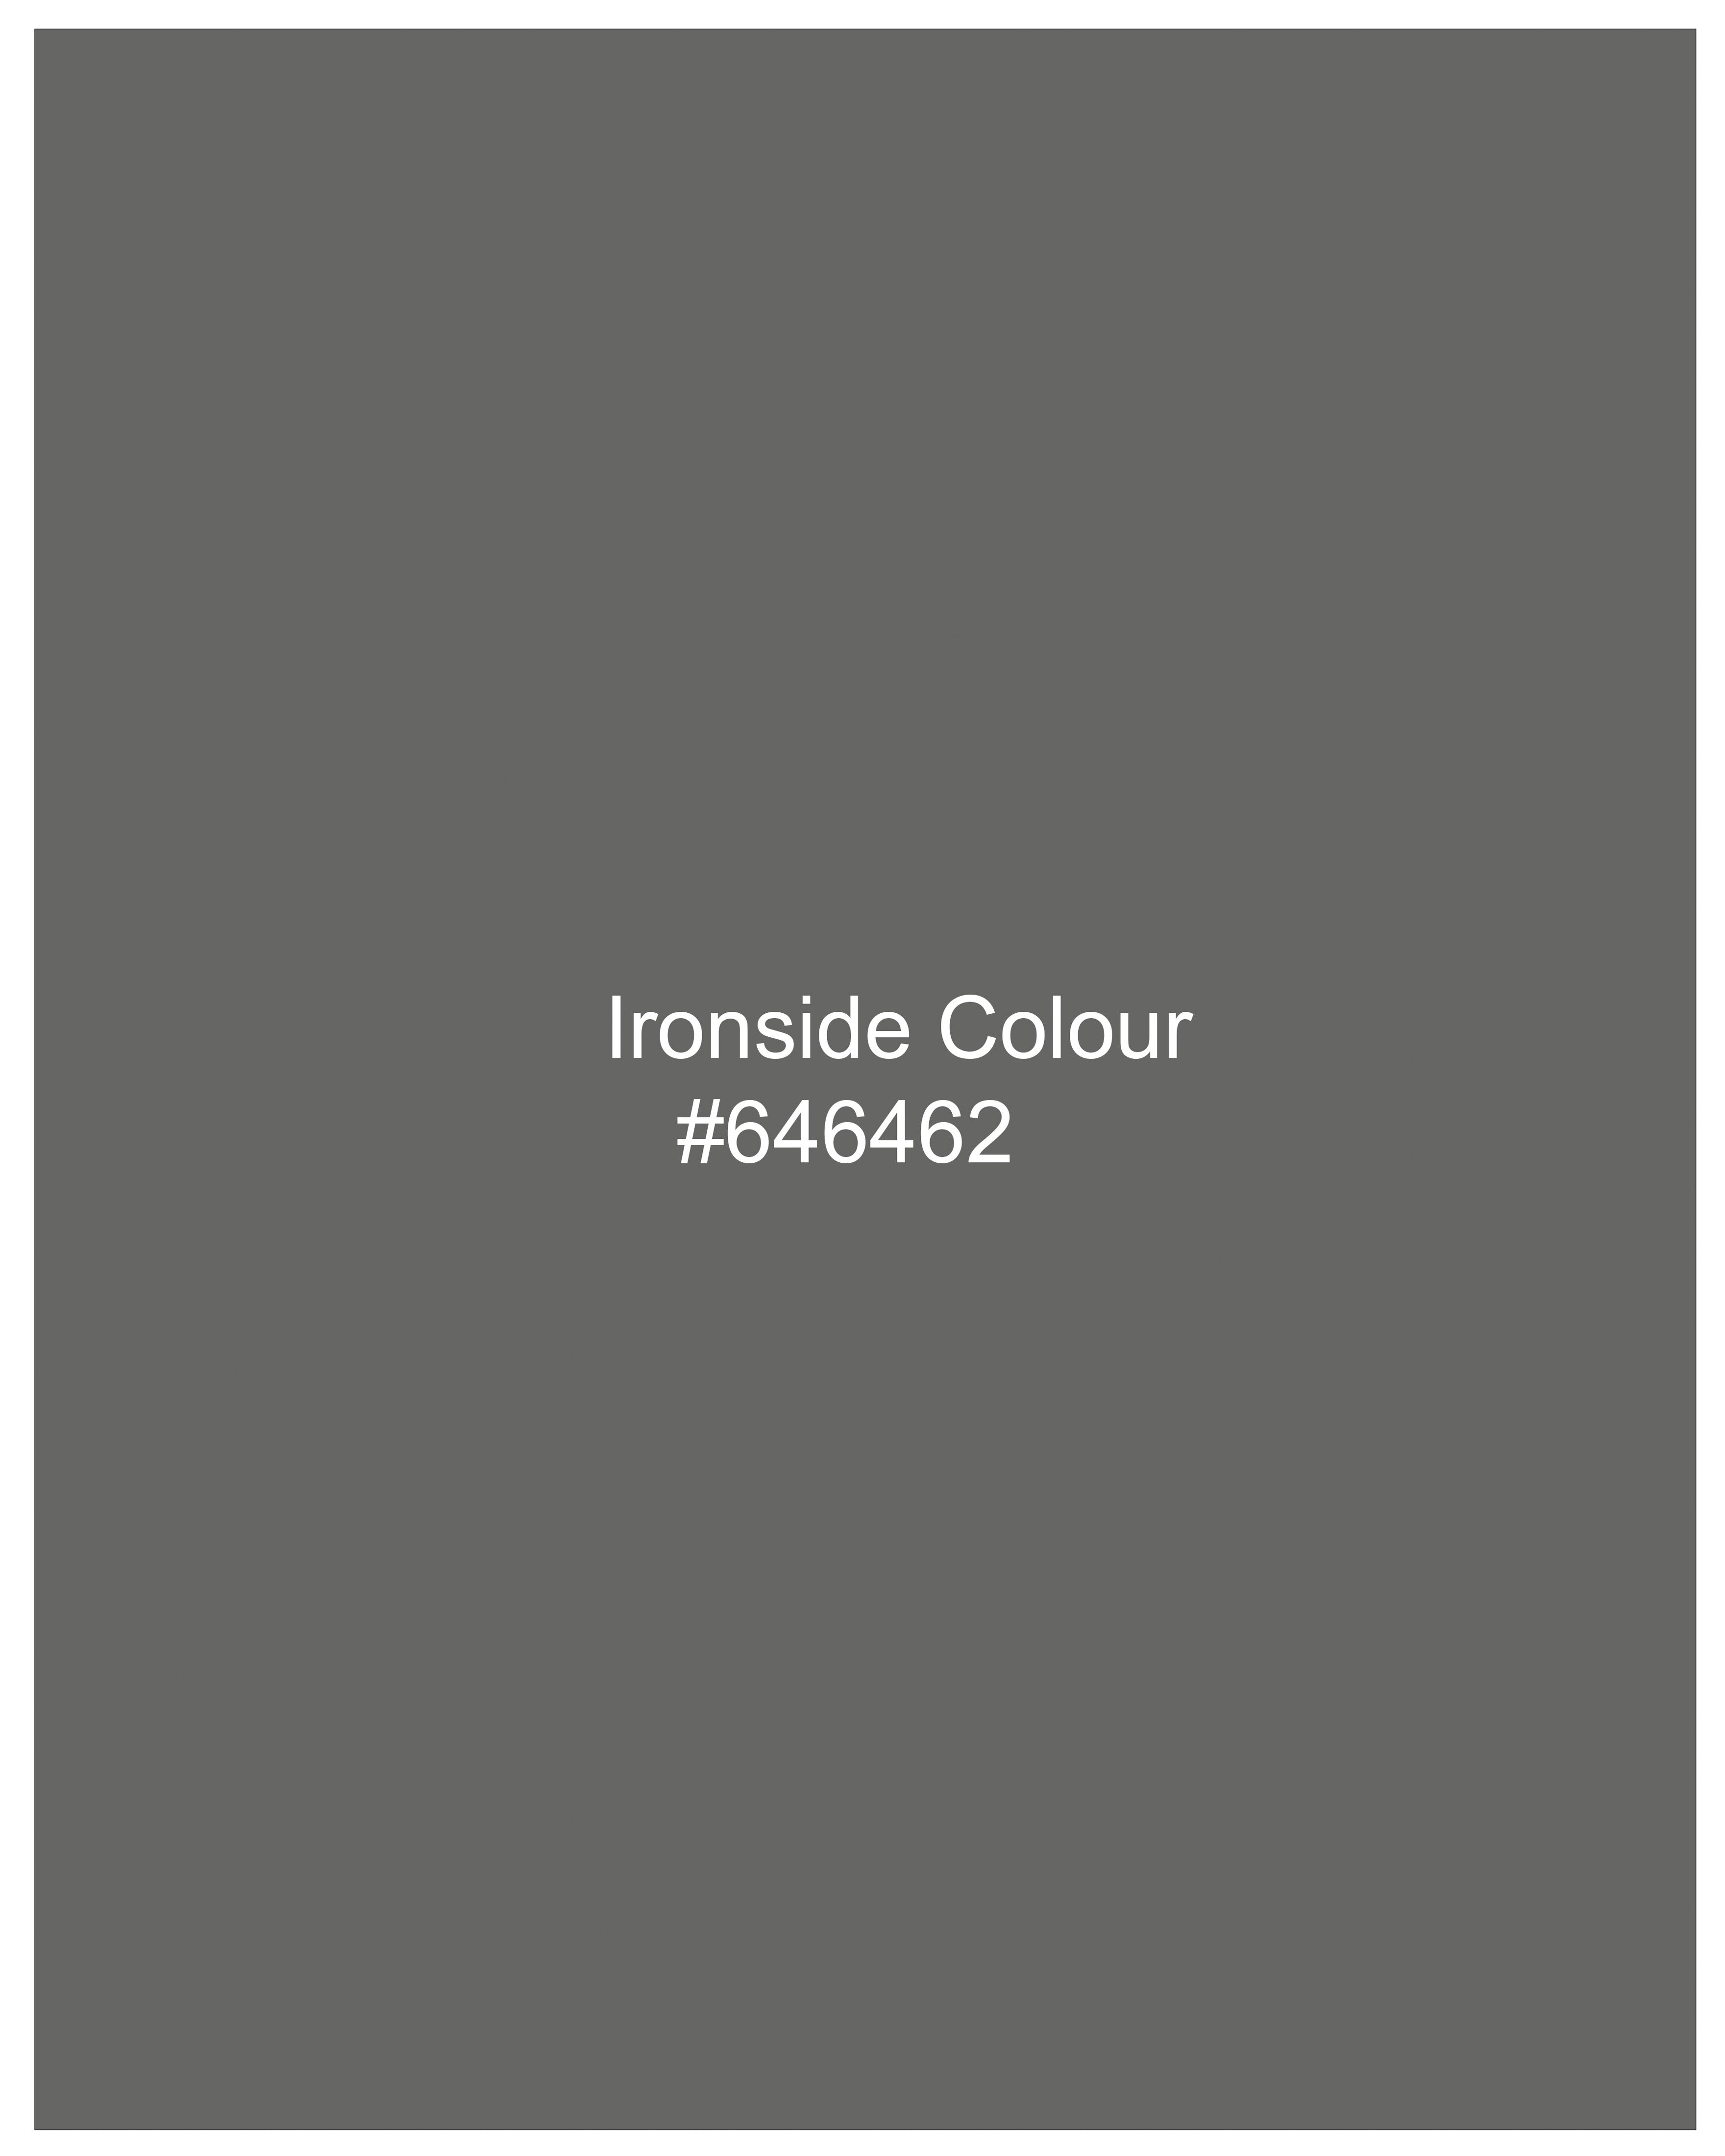 Ironside Gray Stretchable Double Breasted Premium Cotton traveler Suit ST2683-DB-36, ST2683-DB-38, ST2683-DB-40, ST2683-DB-42, ST2683-DB-44, ST2683-DB-46, ST2683-DB-48, ST2683-DB-50, ST2683-DB-52, ST2683-DB-54, ST2683-DB-56, ST2683-DB-58, ST2683-DB-60